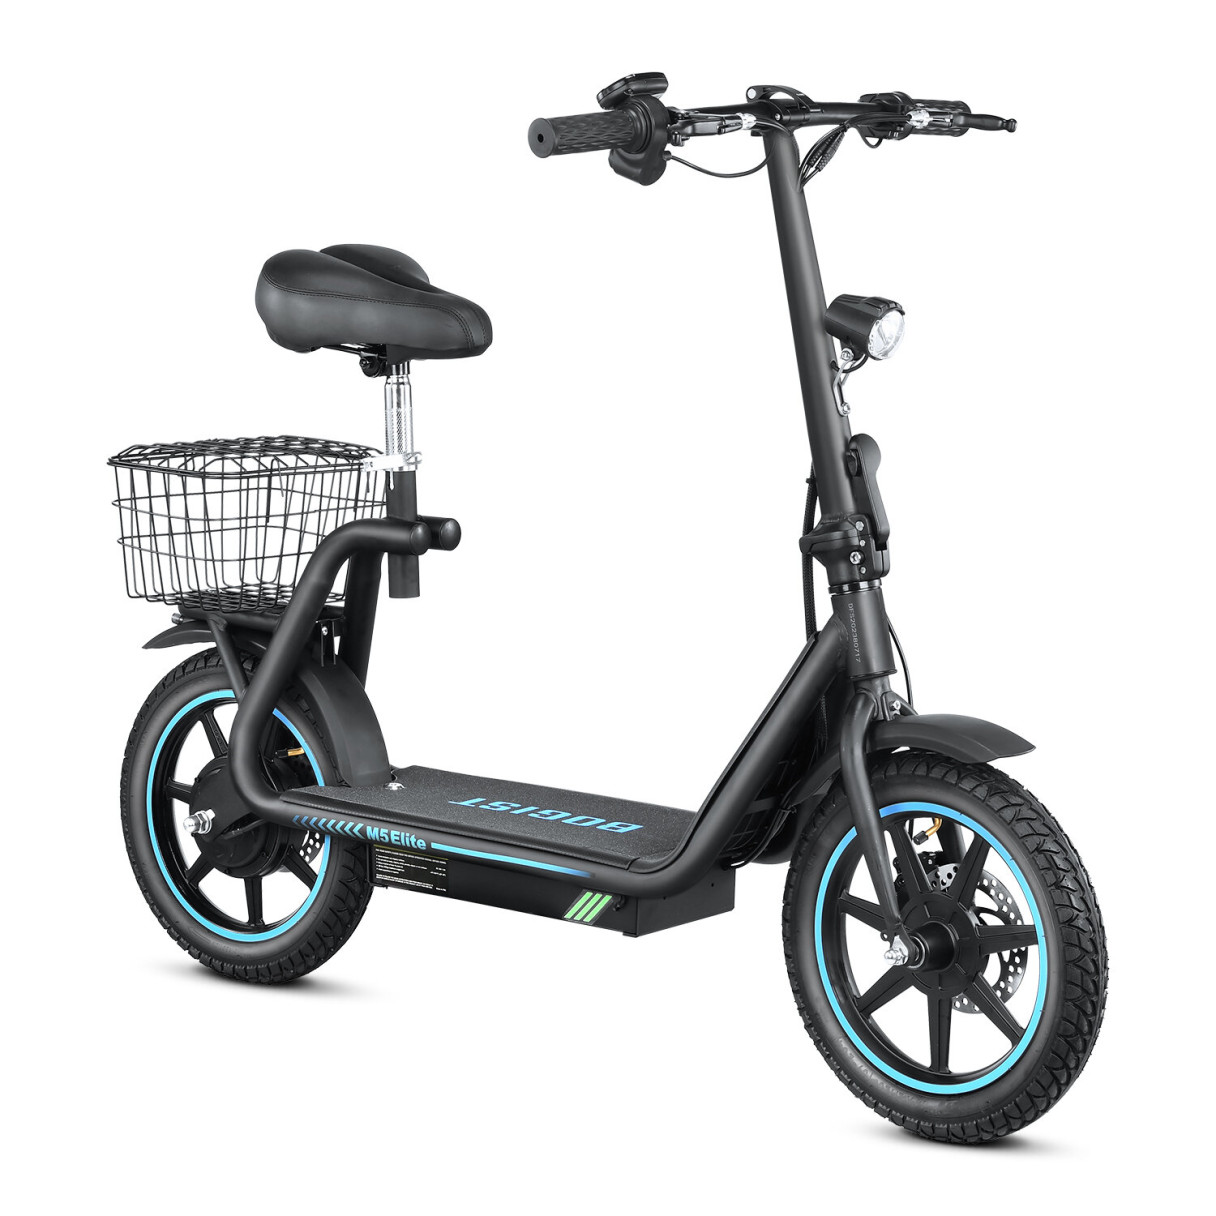 [EU DIRECT] HONEYWHALE M5 Elite Electric Scooter with Seat 500W Motor 48V 13AH Removable Battery 14inch Tires 40-45KM Max Mileage 120KG Max Load